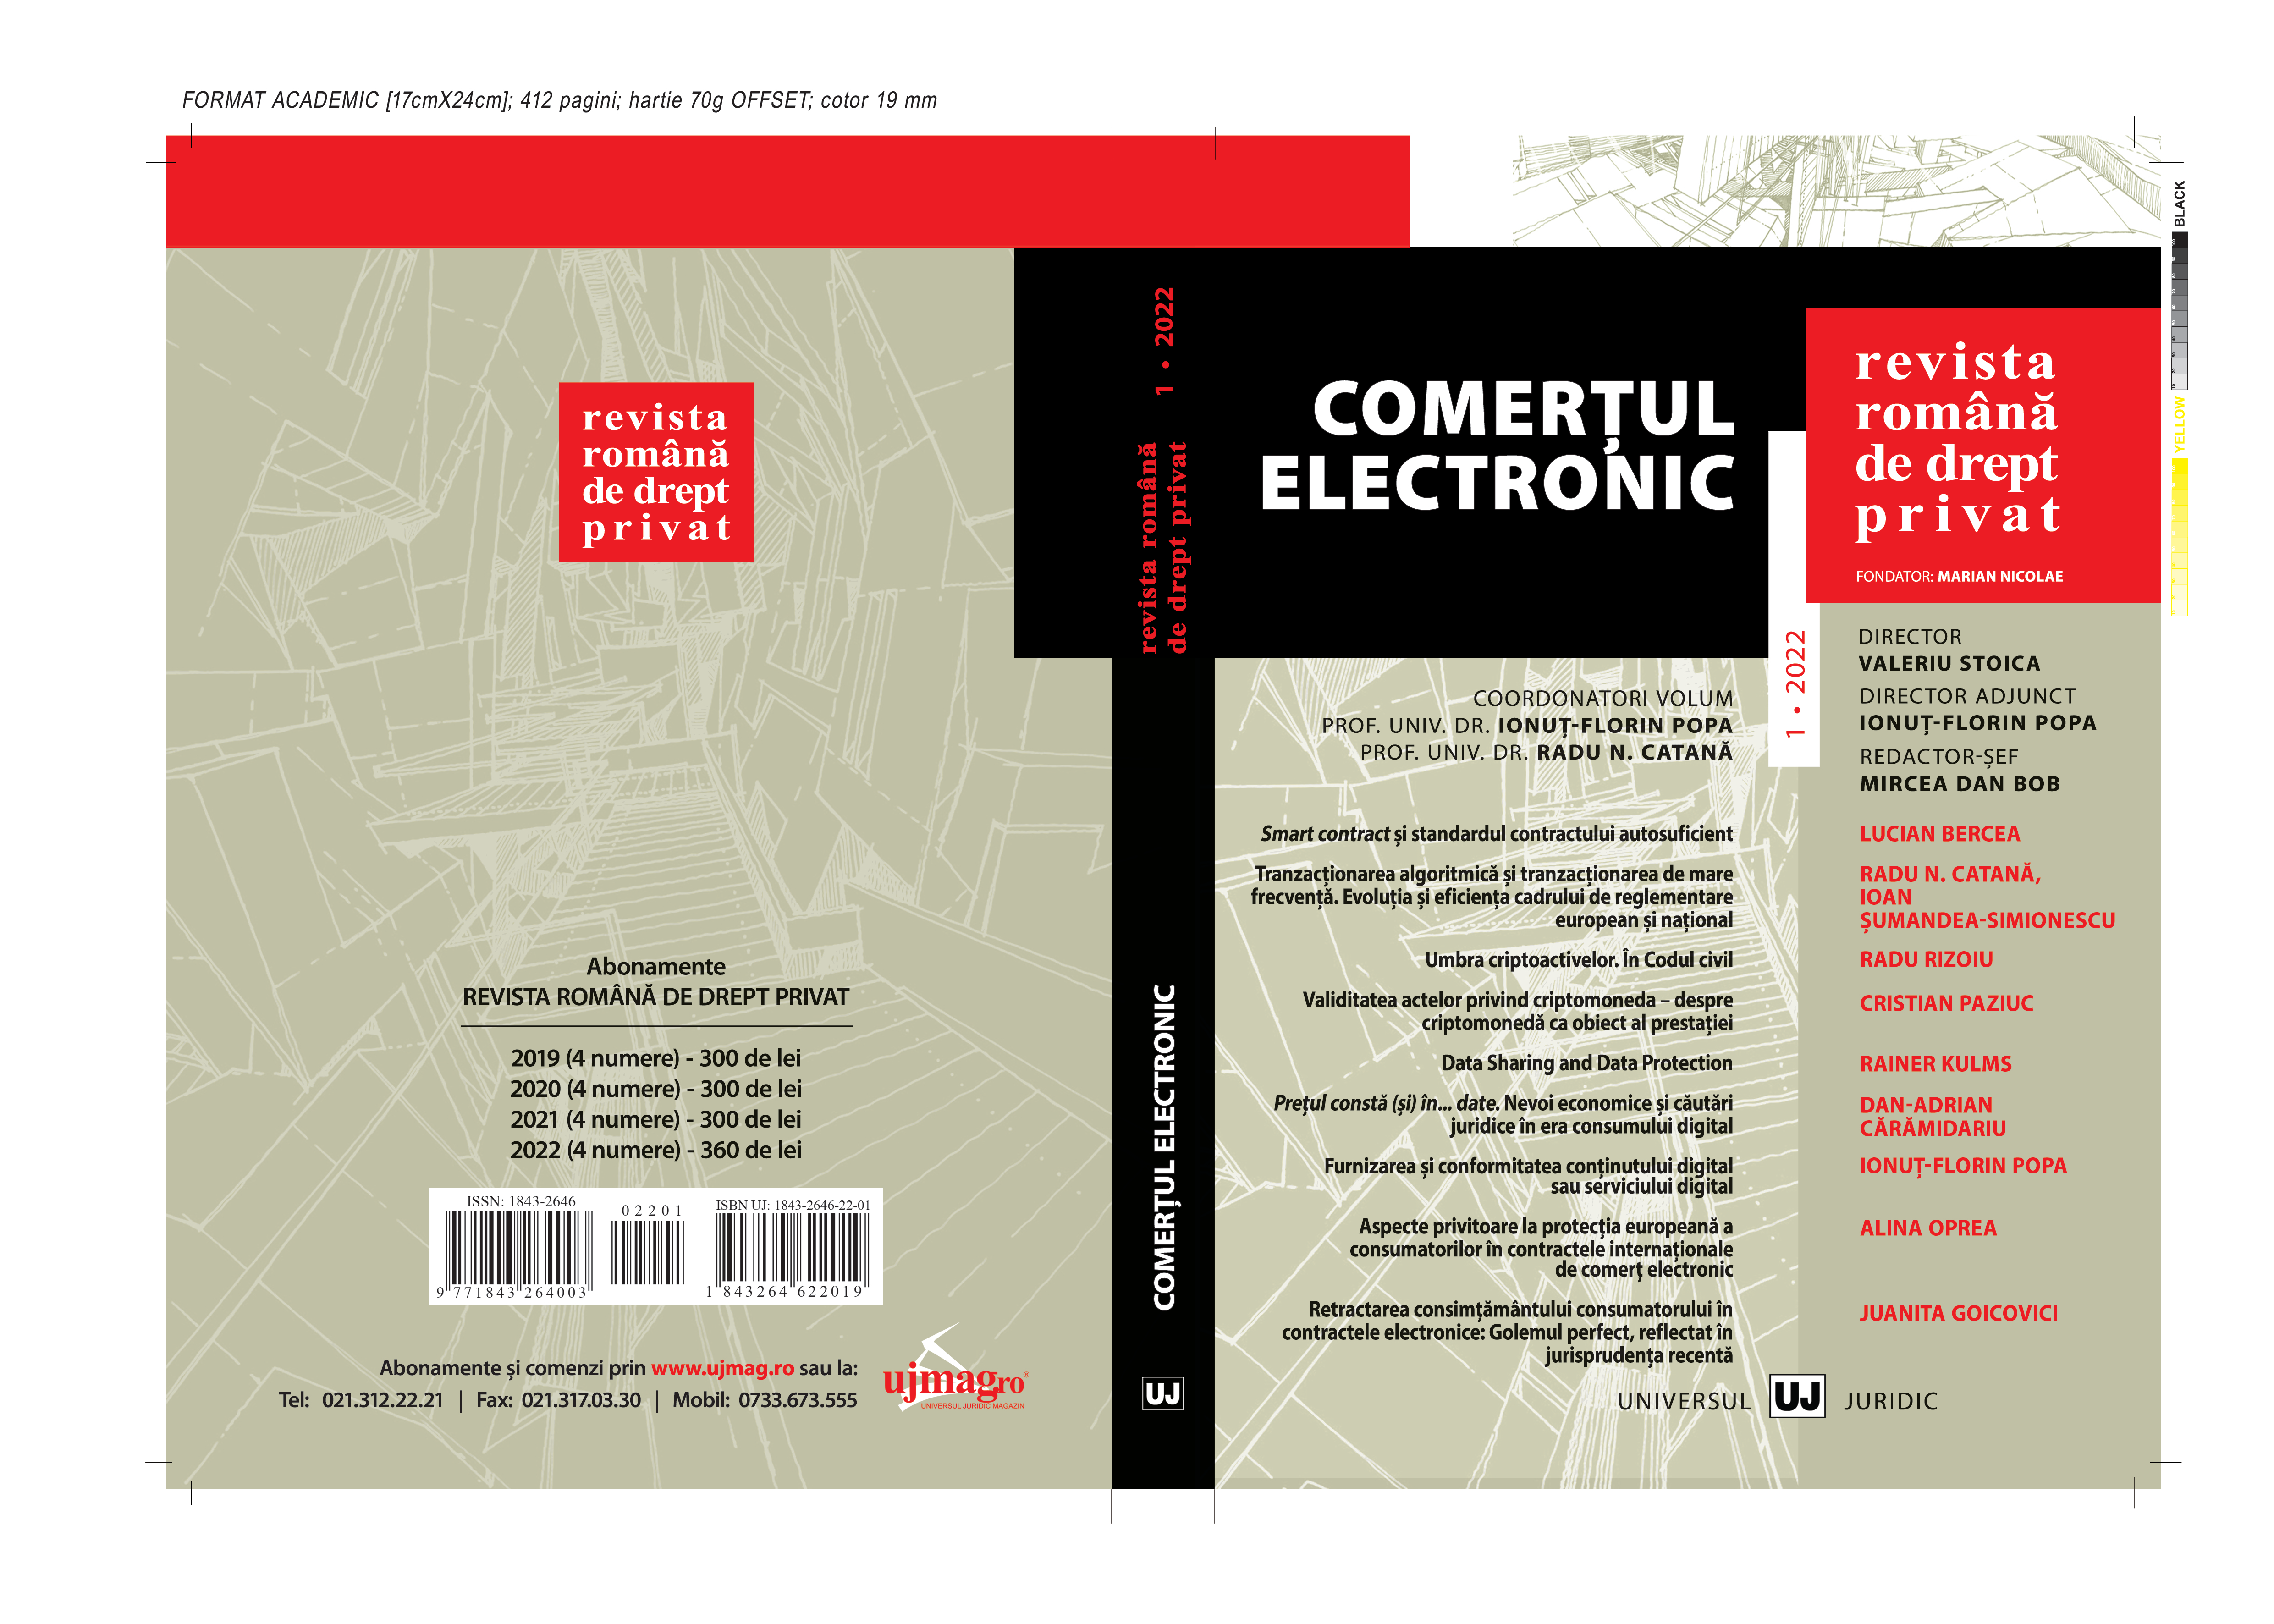 An autonomous law of electronic contracts or e-commerce? Cover Image